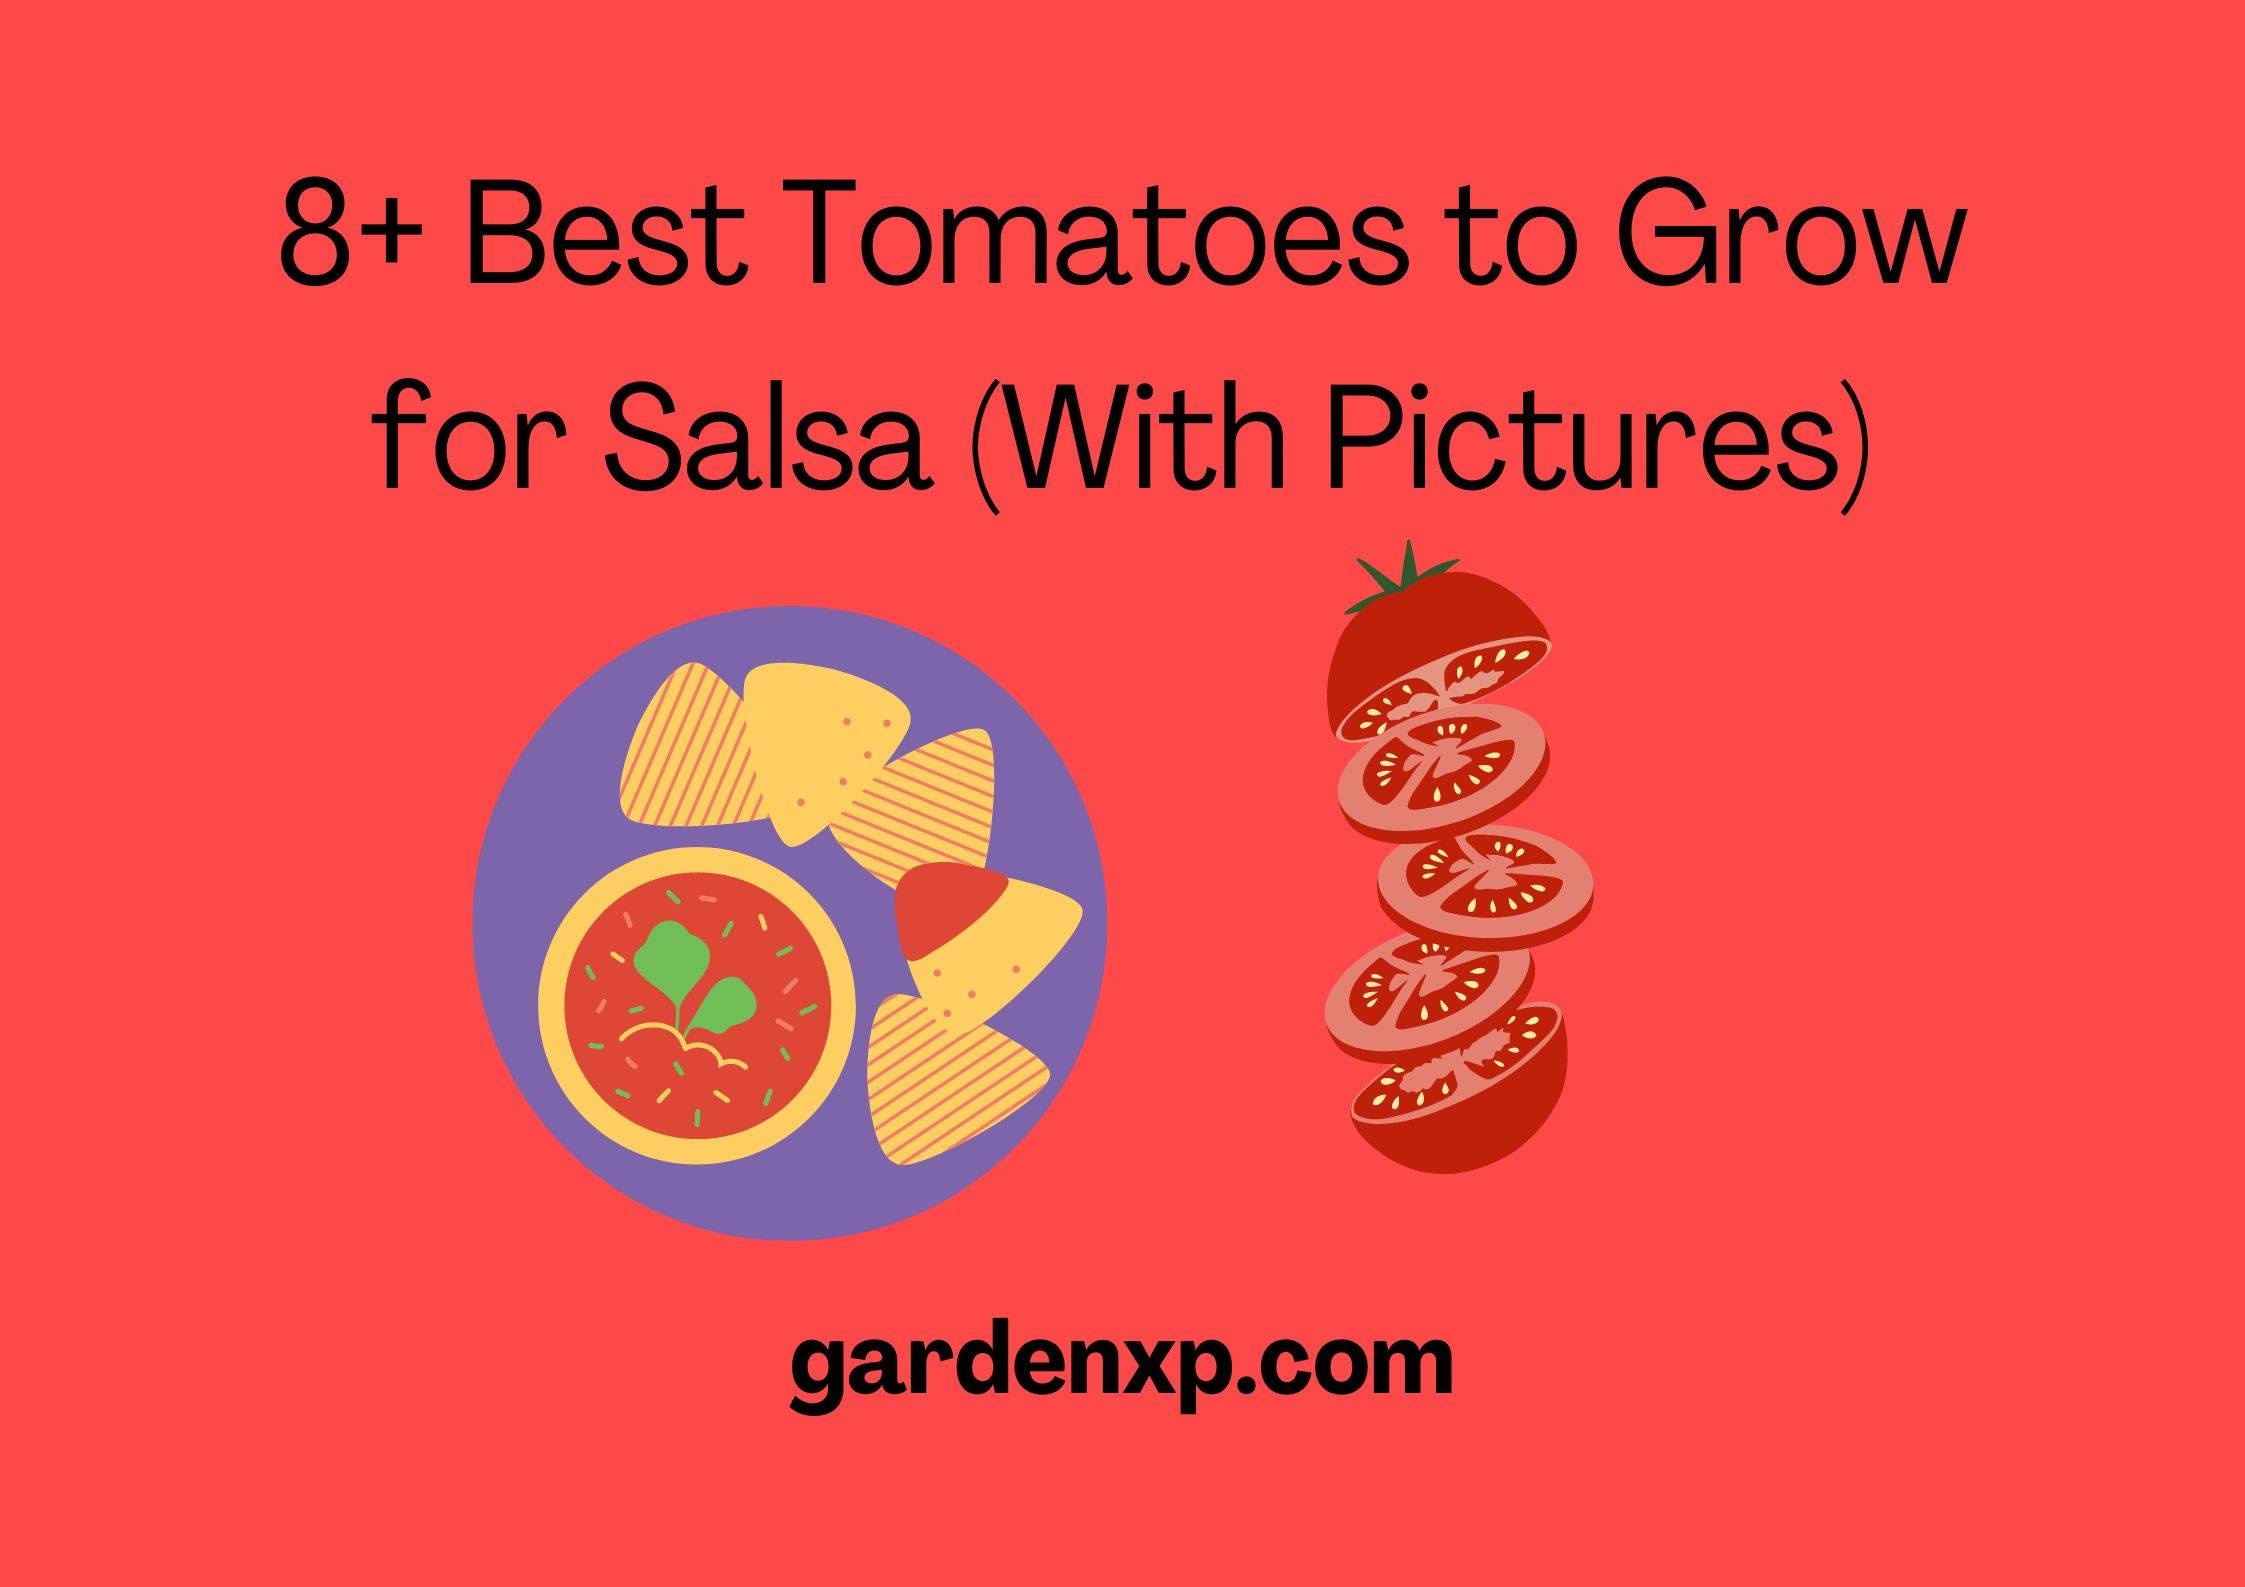 8+ Best Tomatoes to Grow for Salsa (With Pictures)